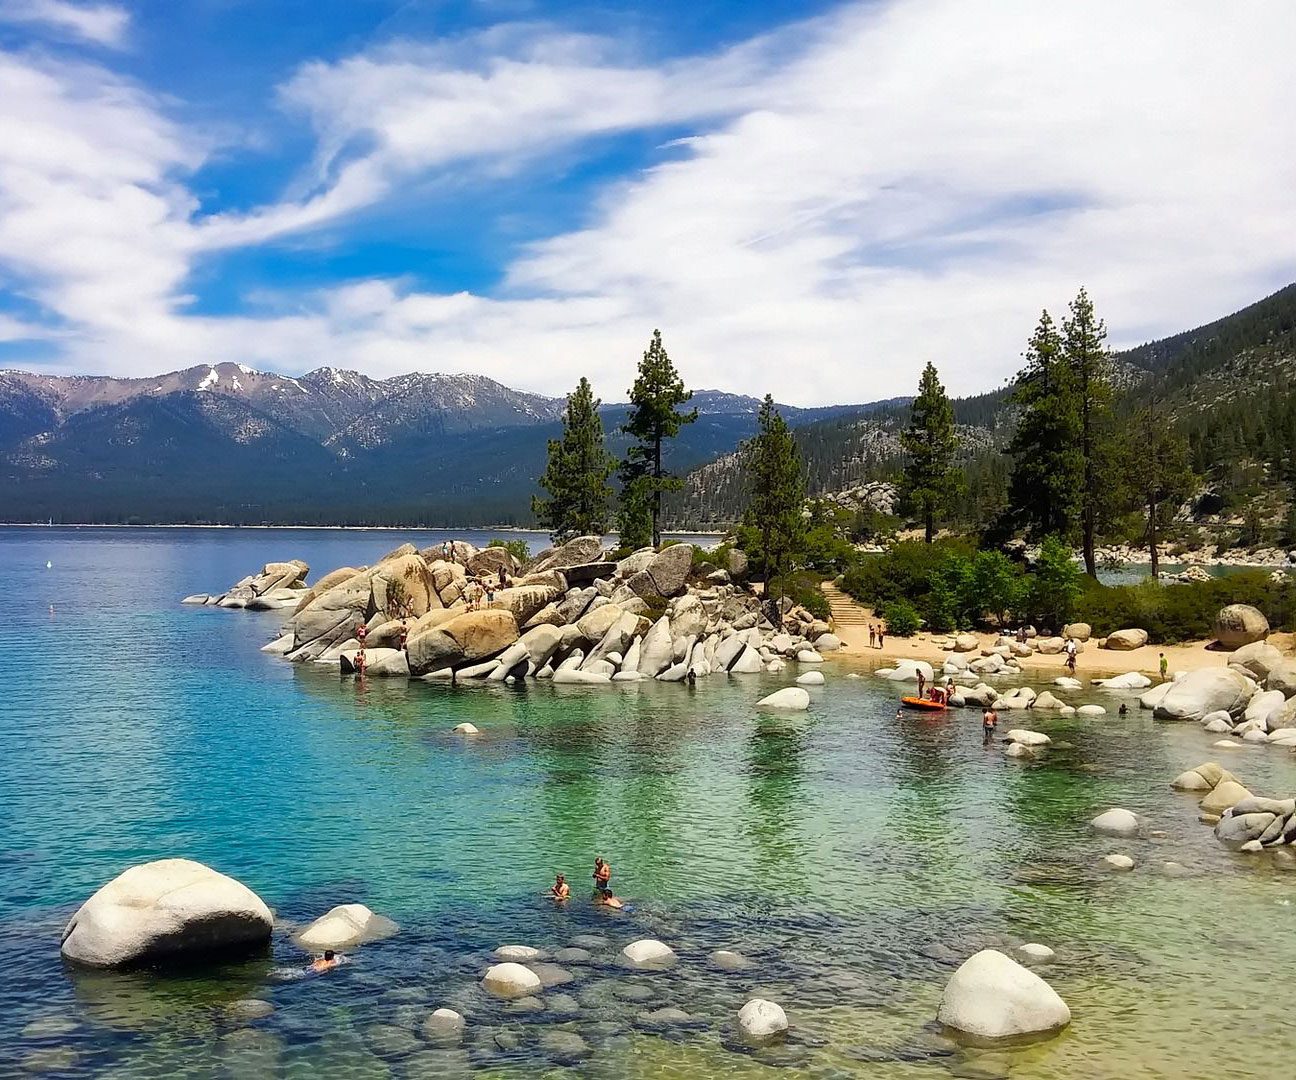 Kids playing in the turquoise blue water of Lake Tahoe.